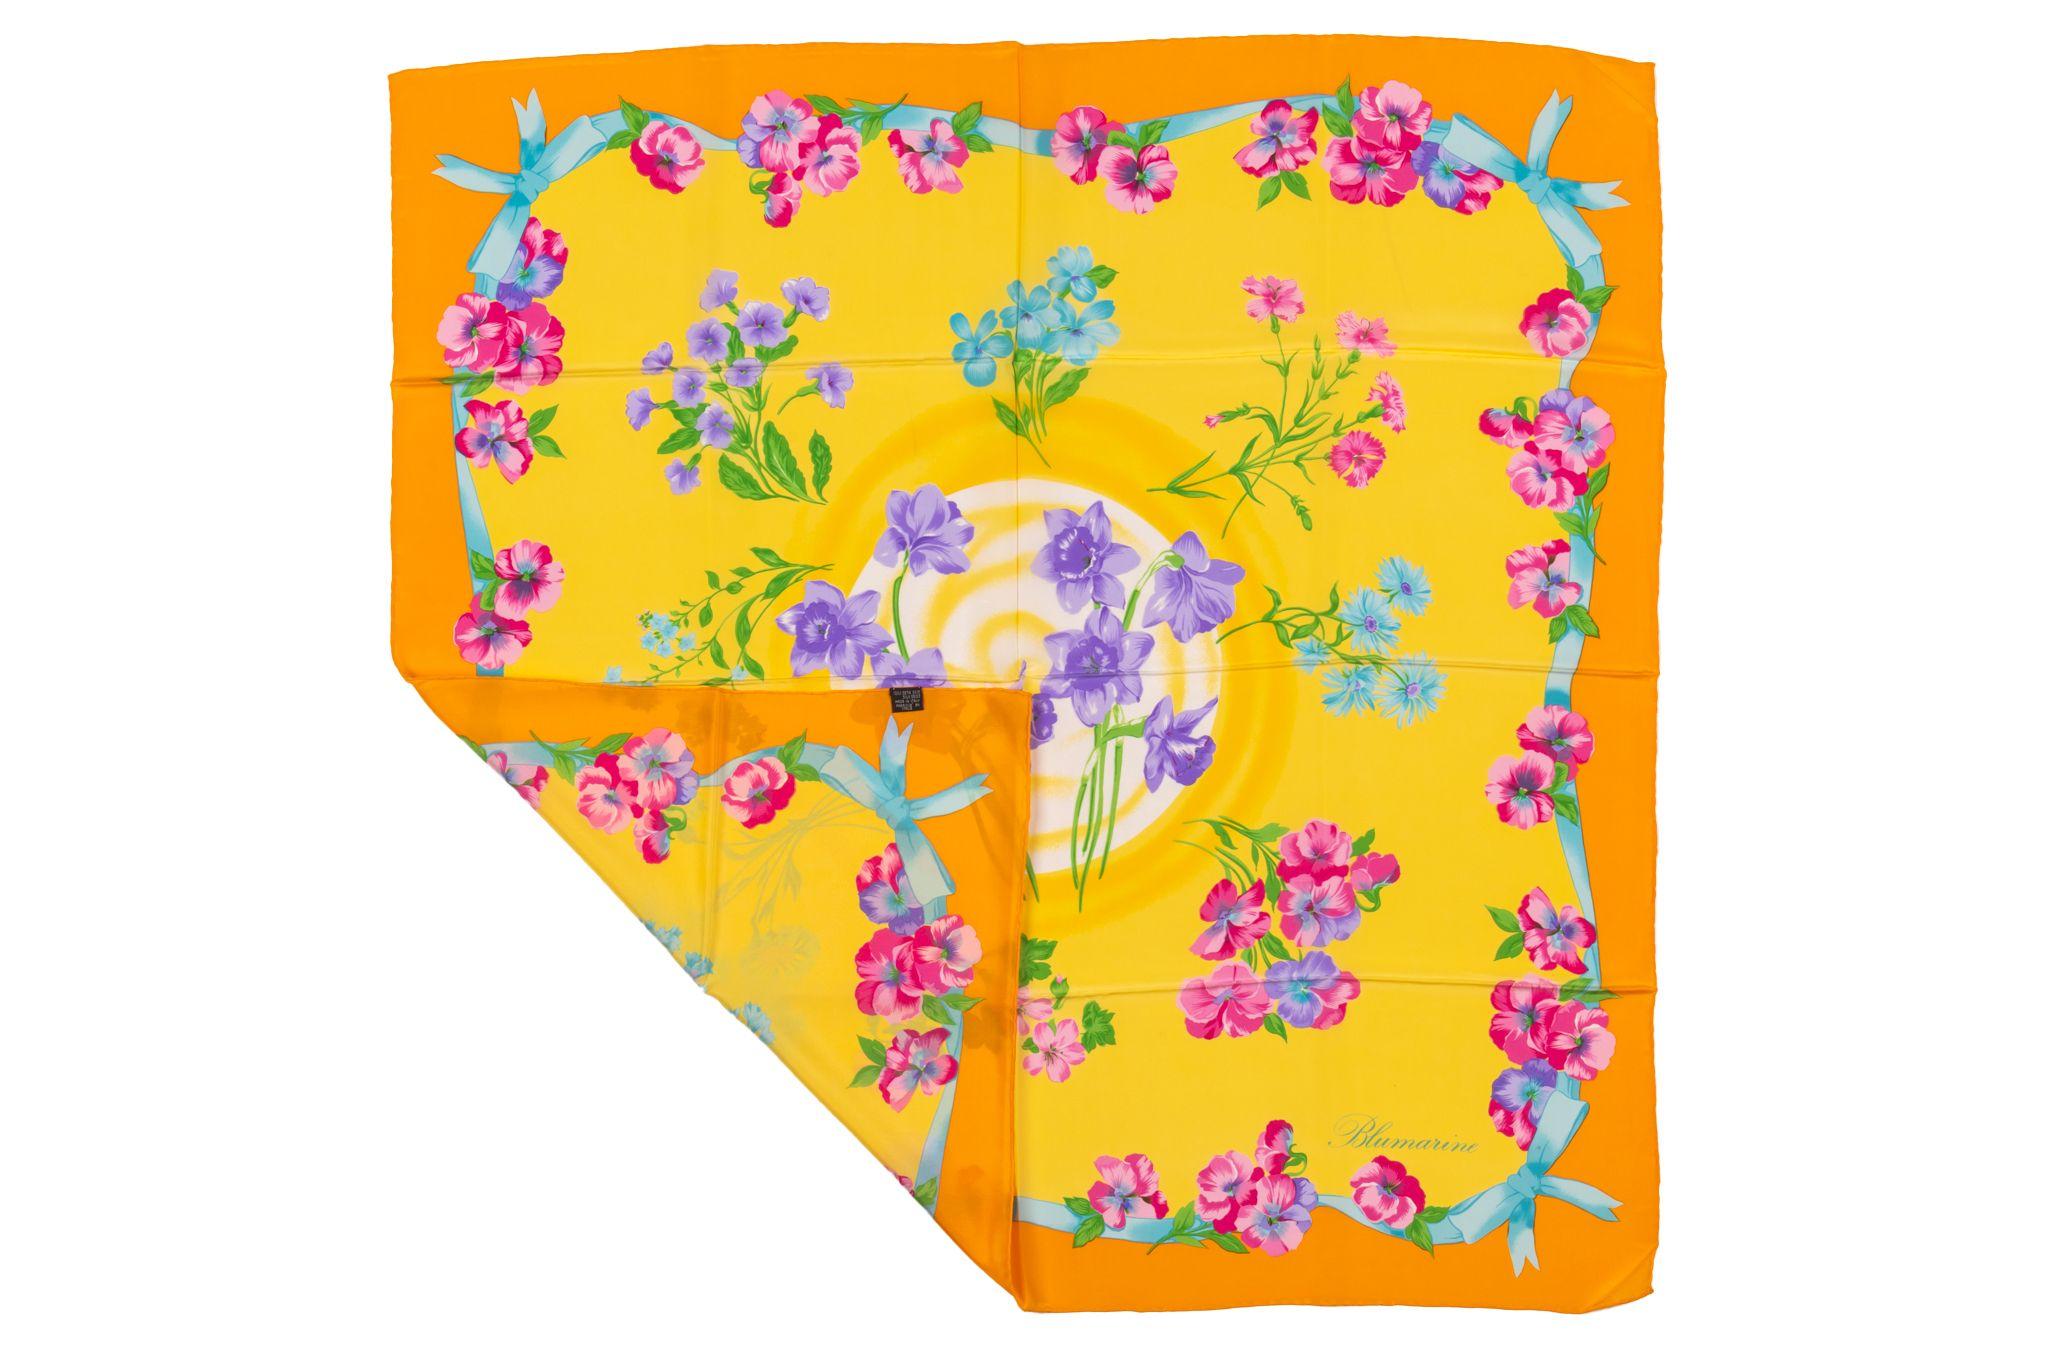 Blumarine Vintage Floral Silk Scarf in yellow. The pattern features several flowers in different colors. The item is in excellent condition.